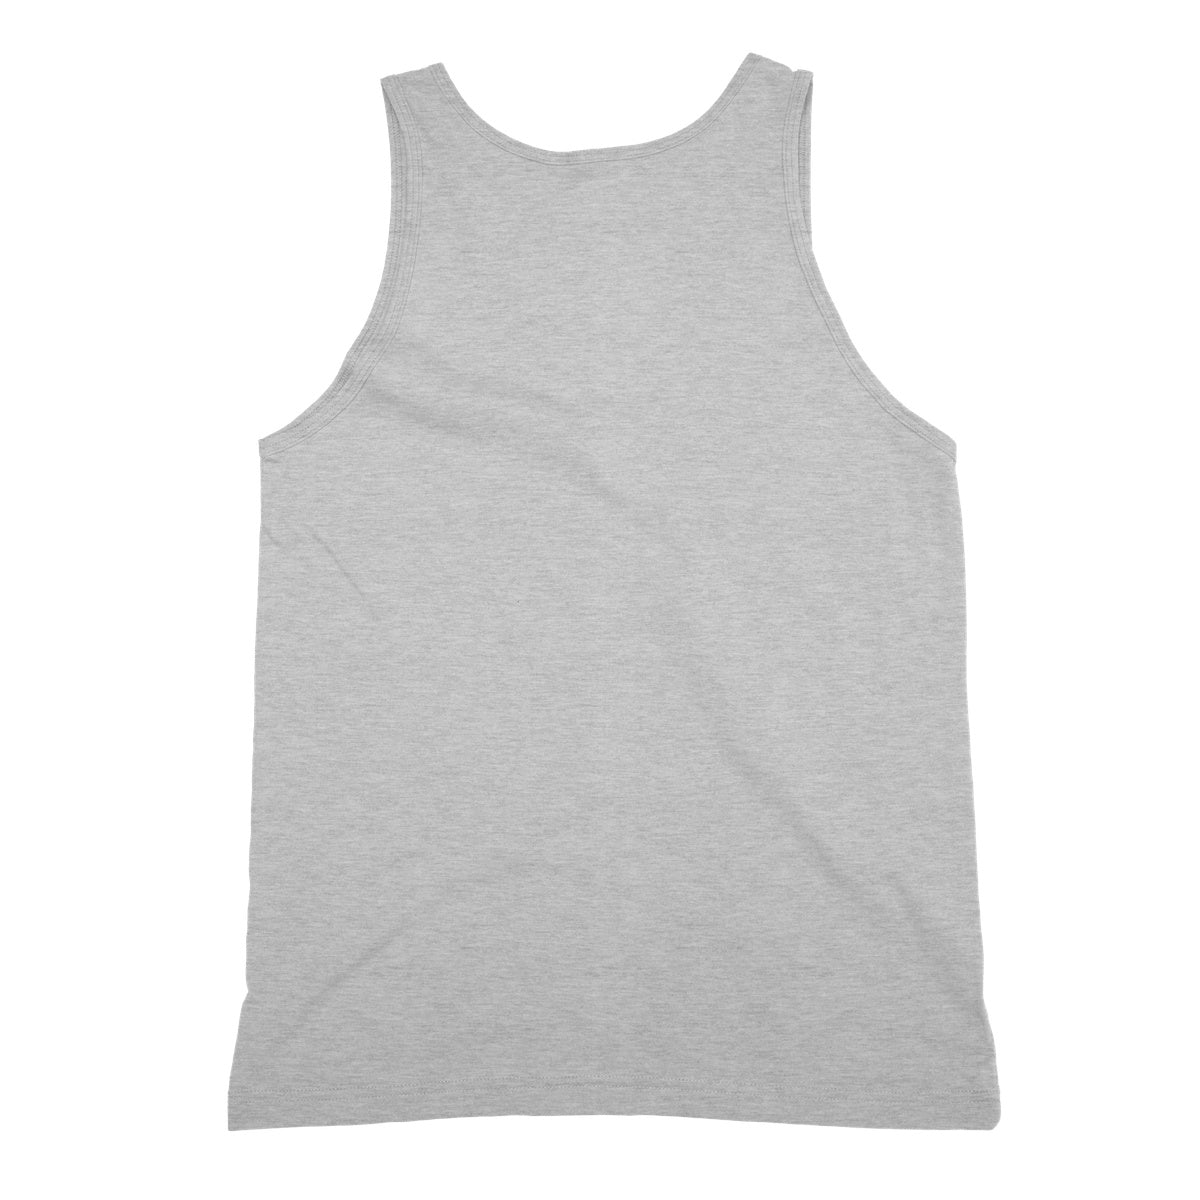 Seed of Life in Nine Softstyle Tank Top